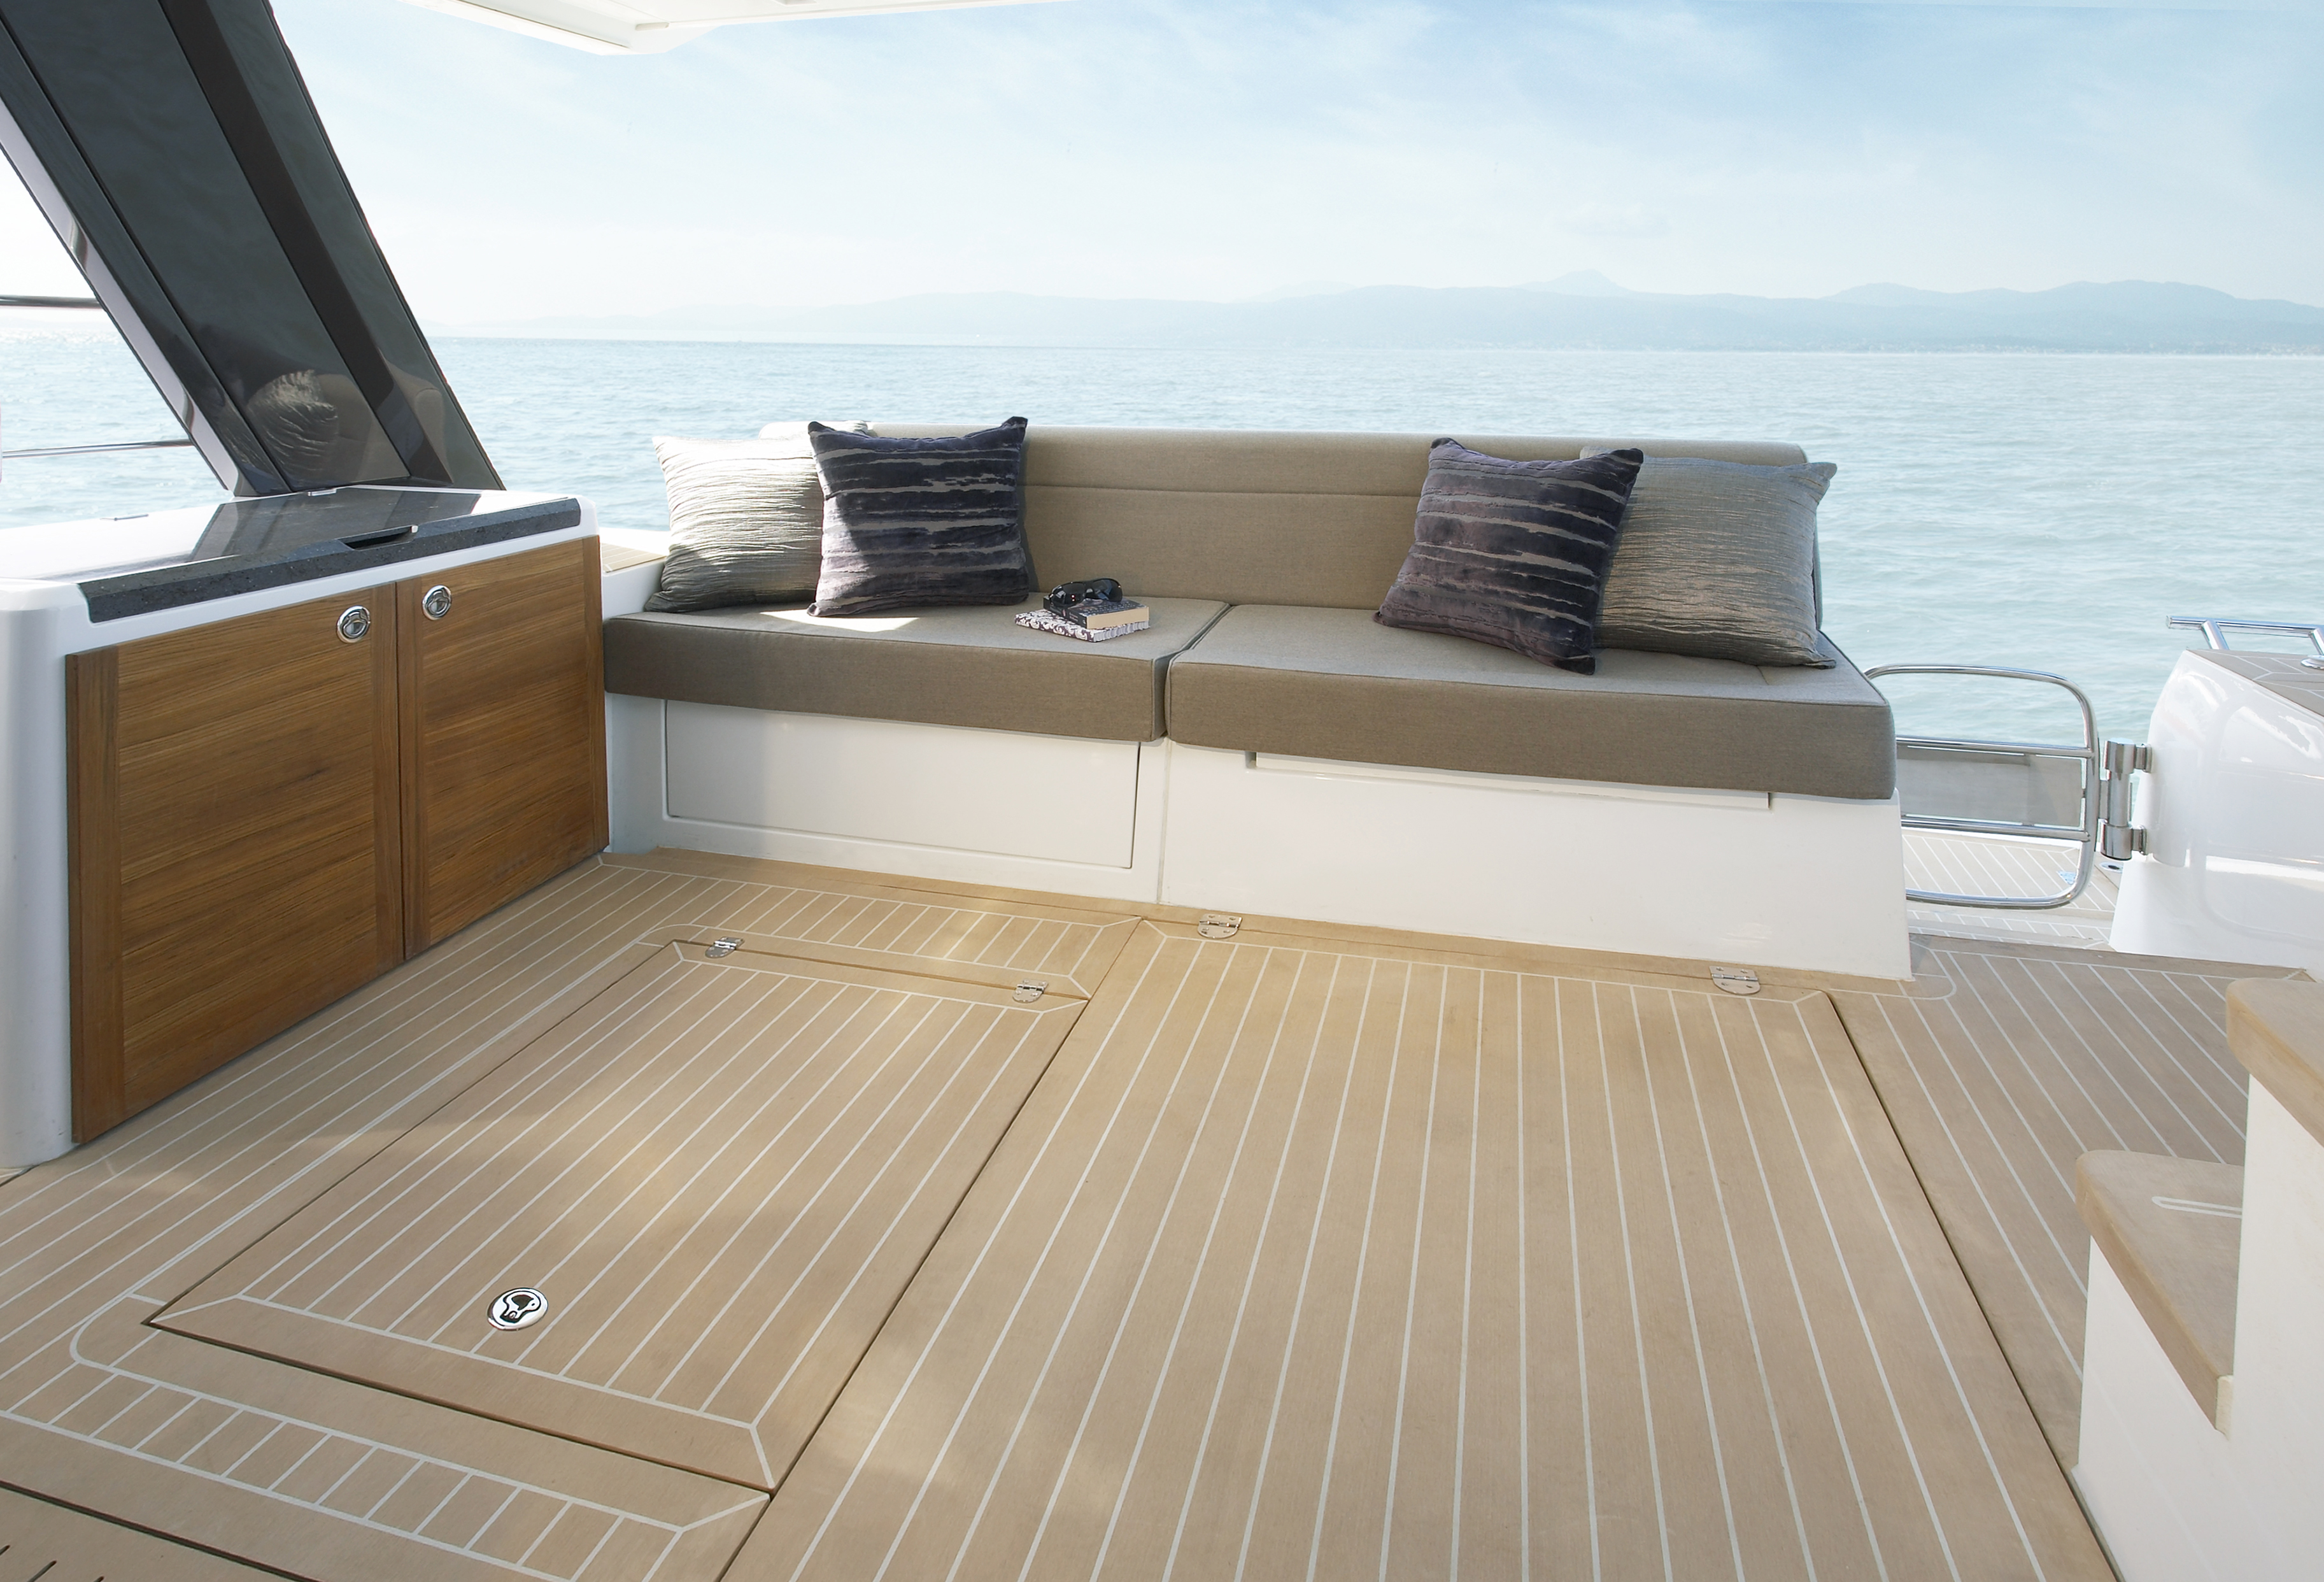 The F48 has an open plan feel throughout. Each area of the boat 